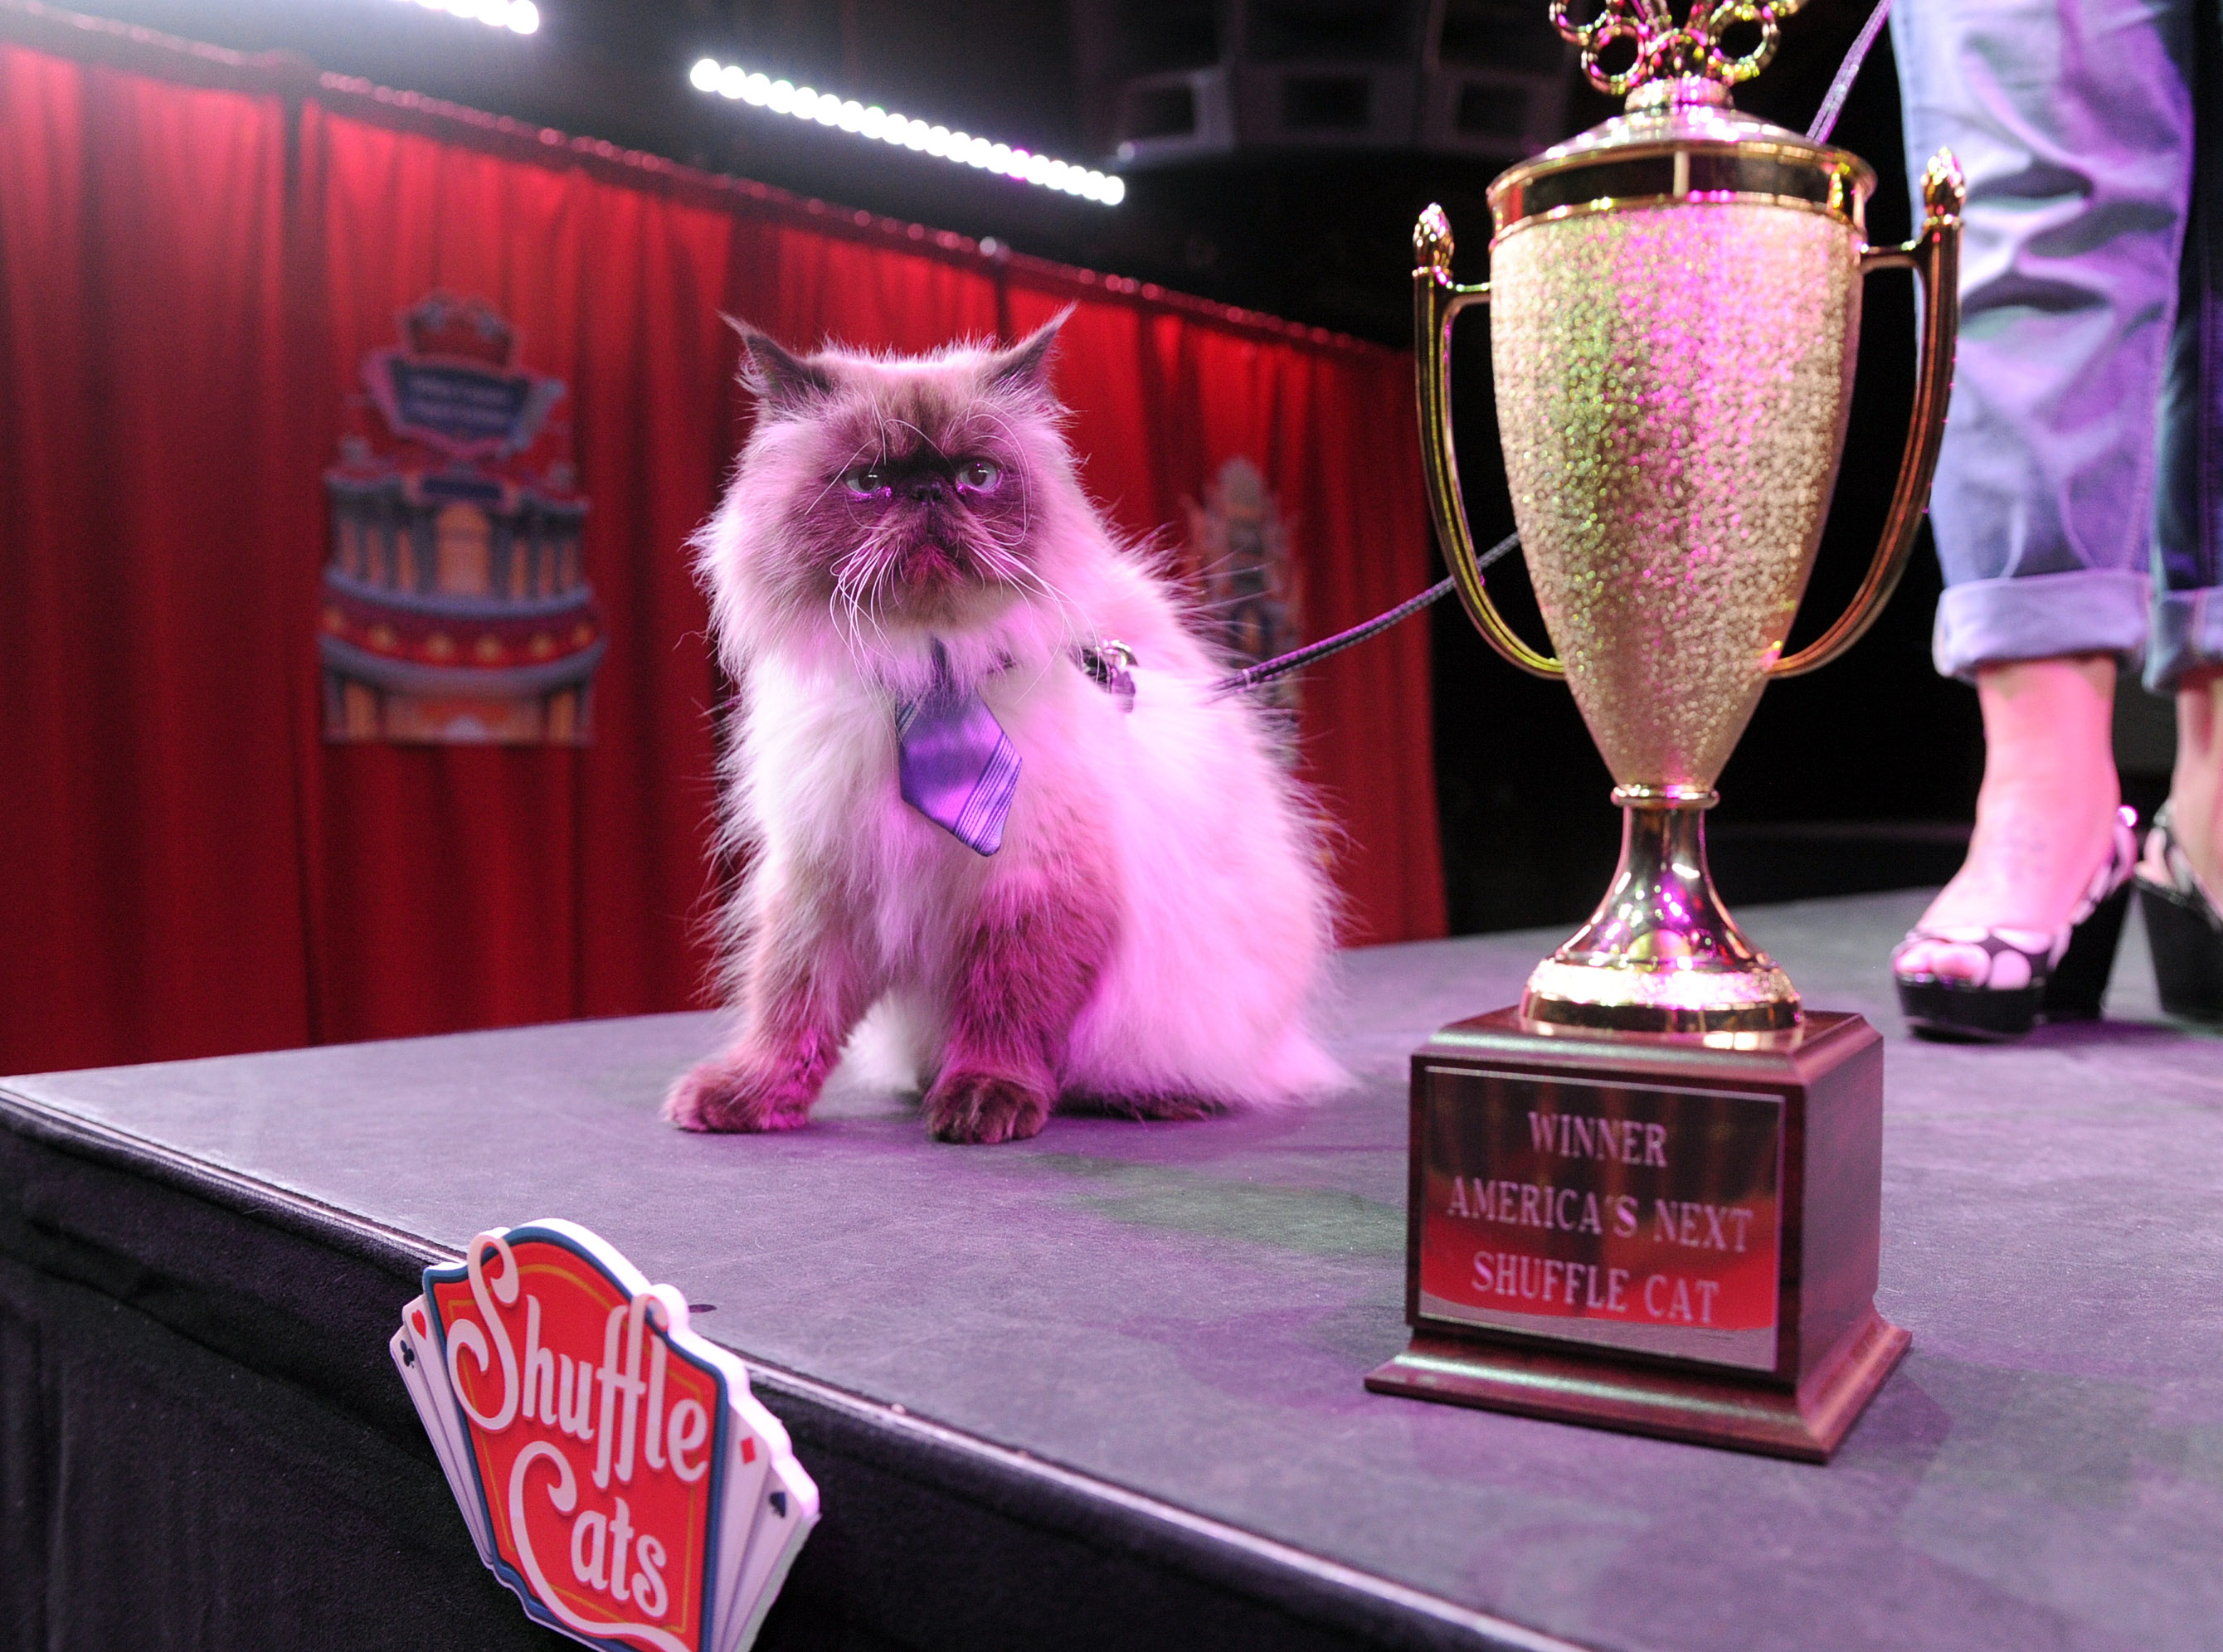 King Announces Winner of 'America's Next Shuffle Cat' Contest